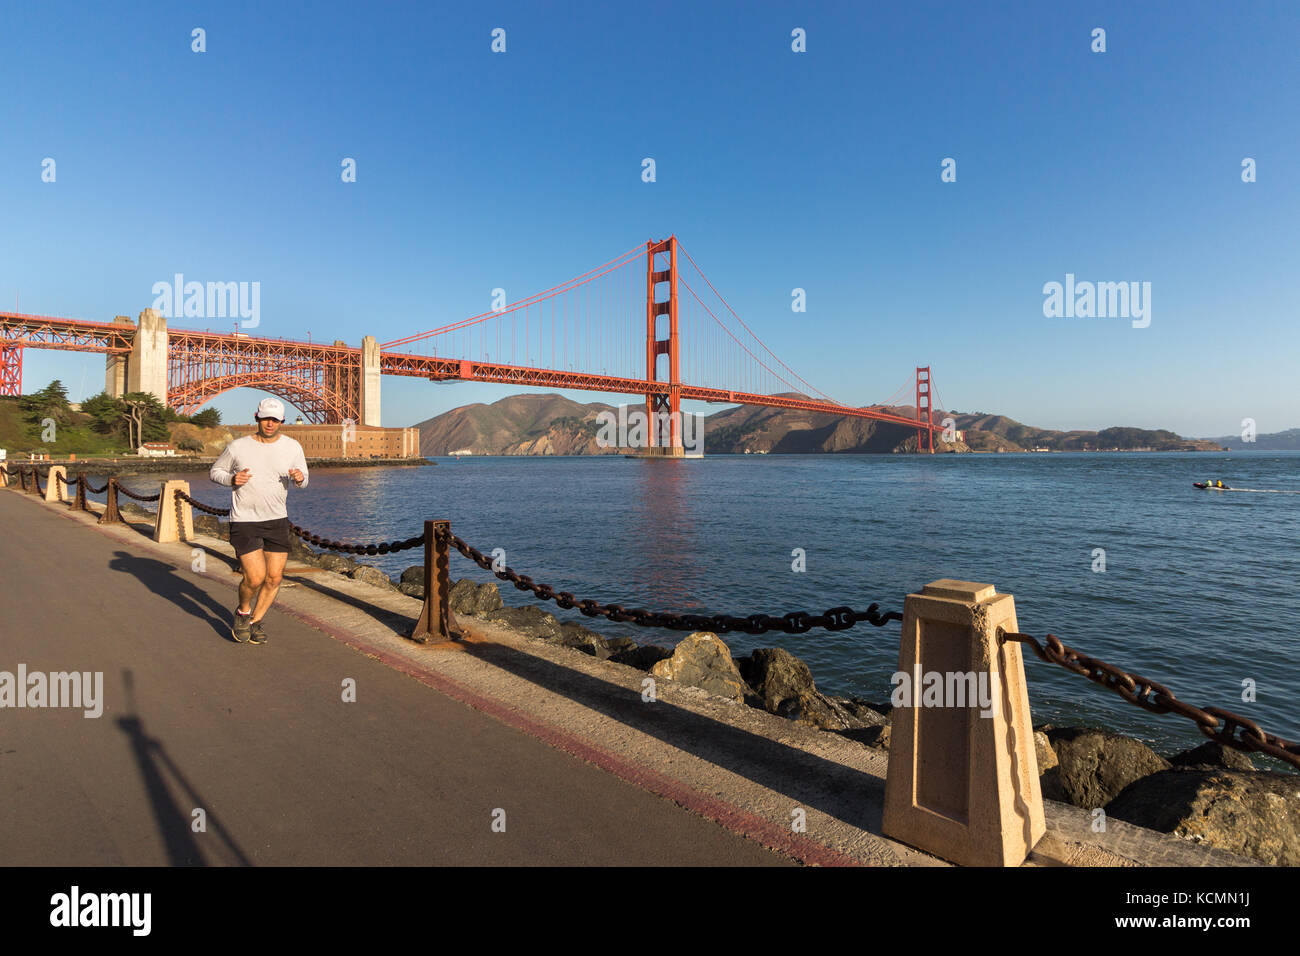 San Francisco, California, USA - September 15th, 2017: A man is jogging on the Marine Dr road, The Golden Gate Bridge as a Background. Stock Photo